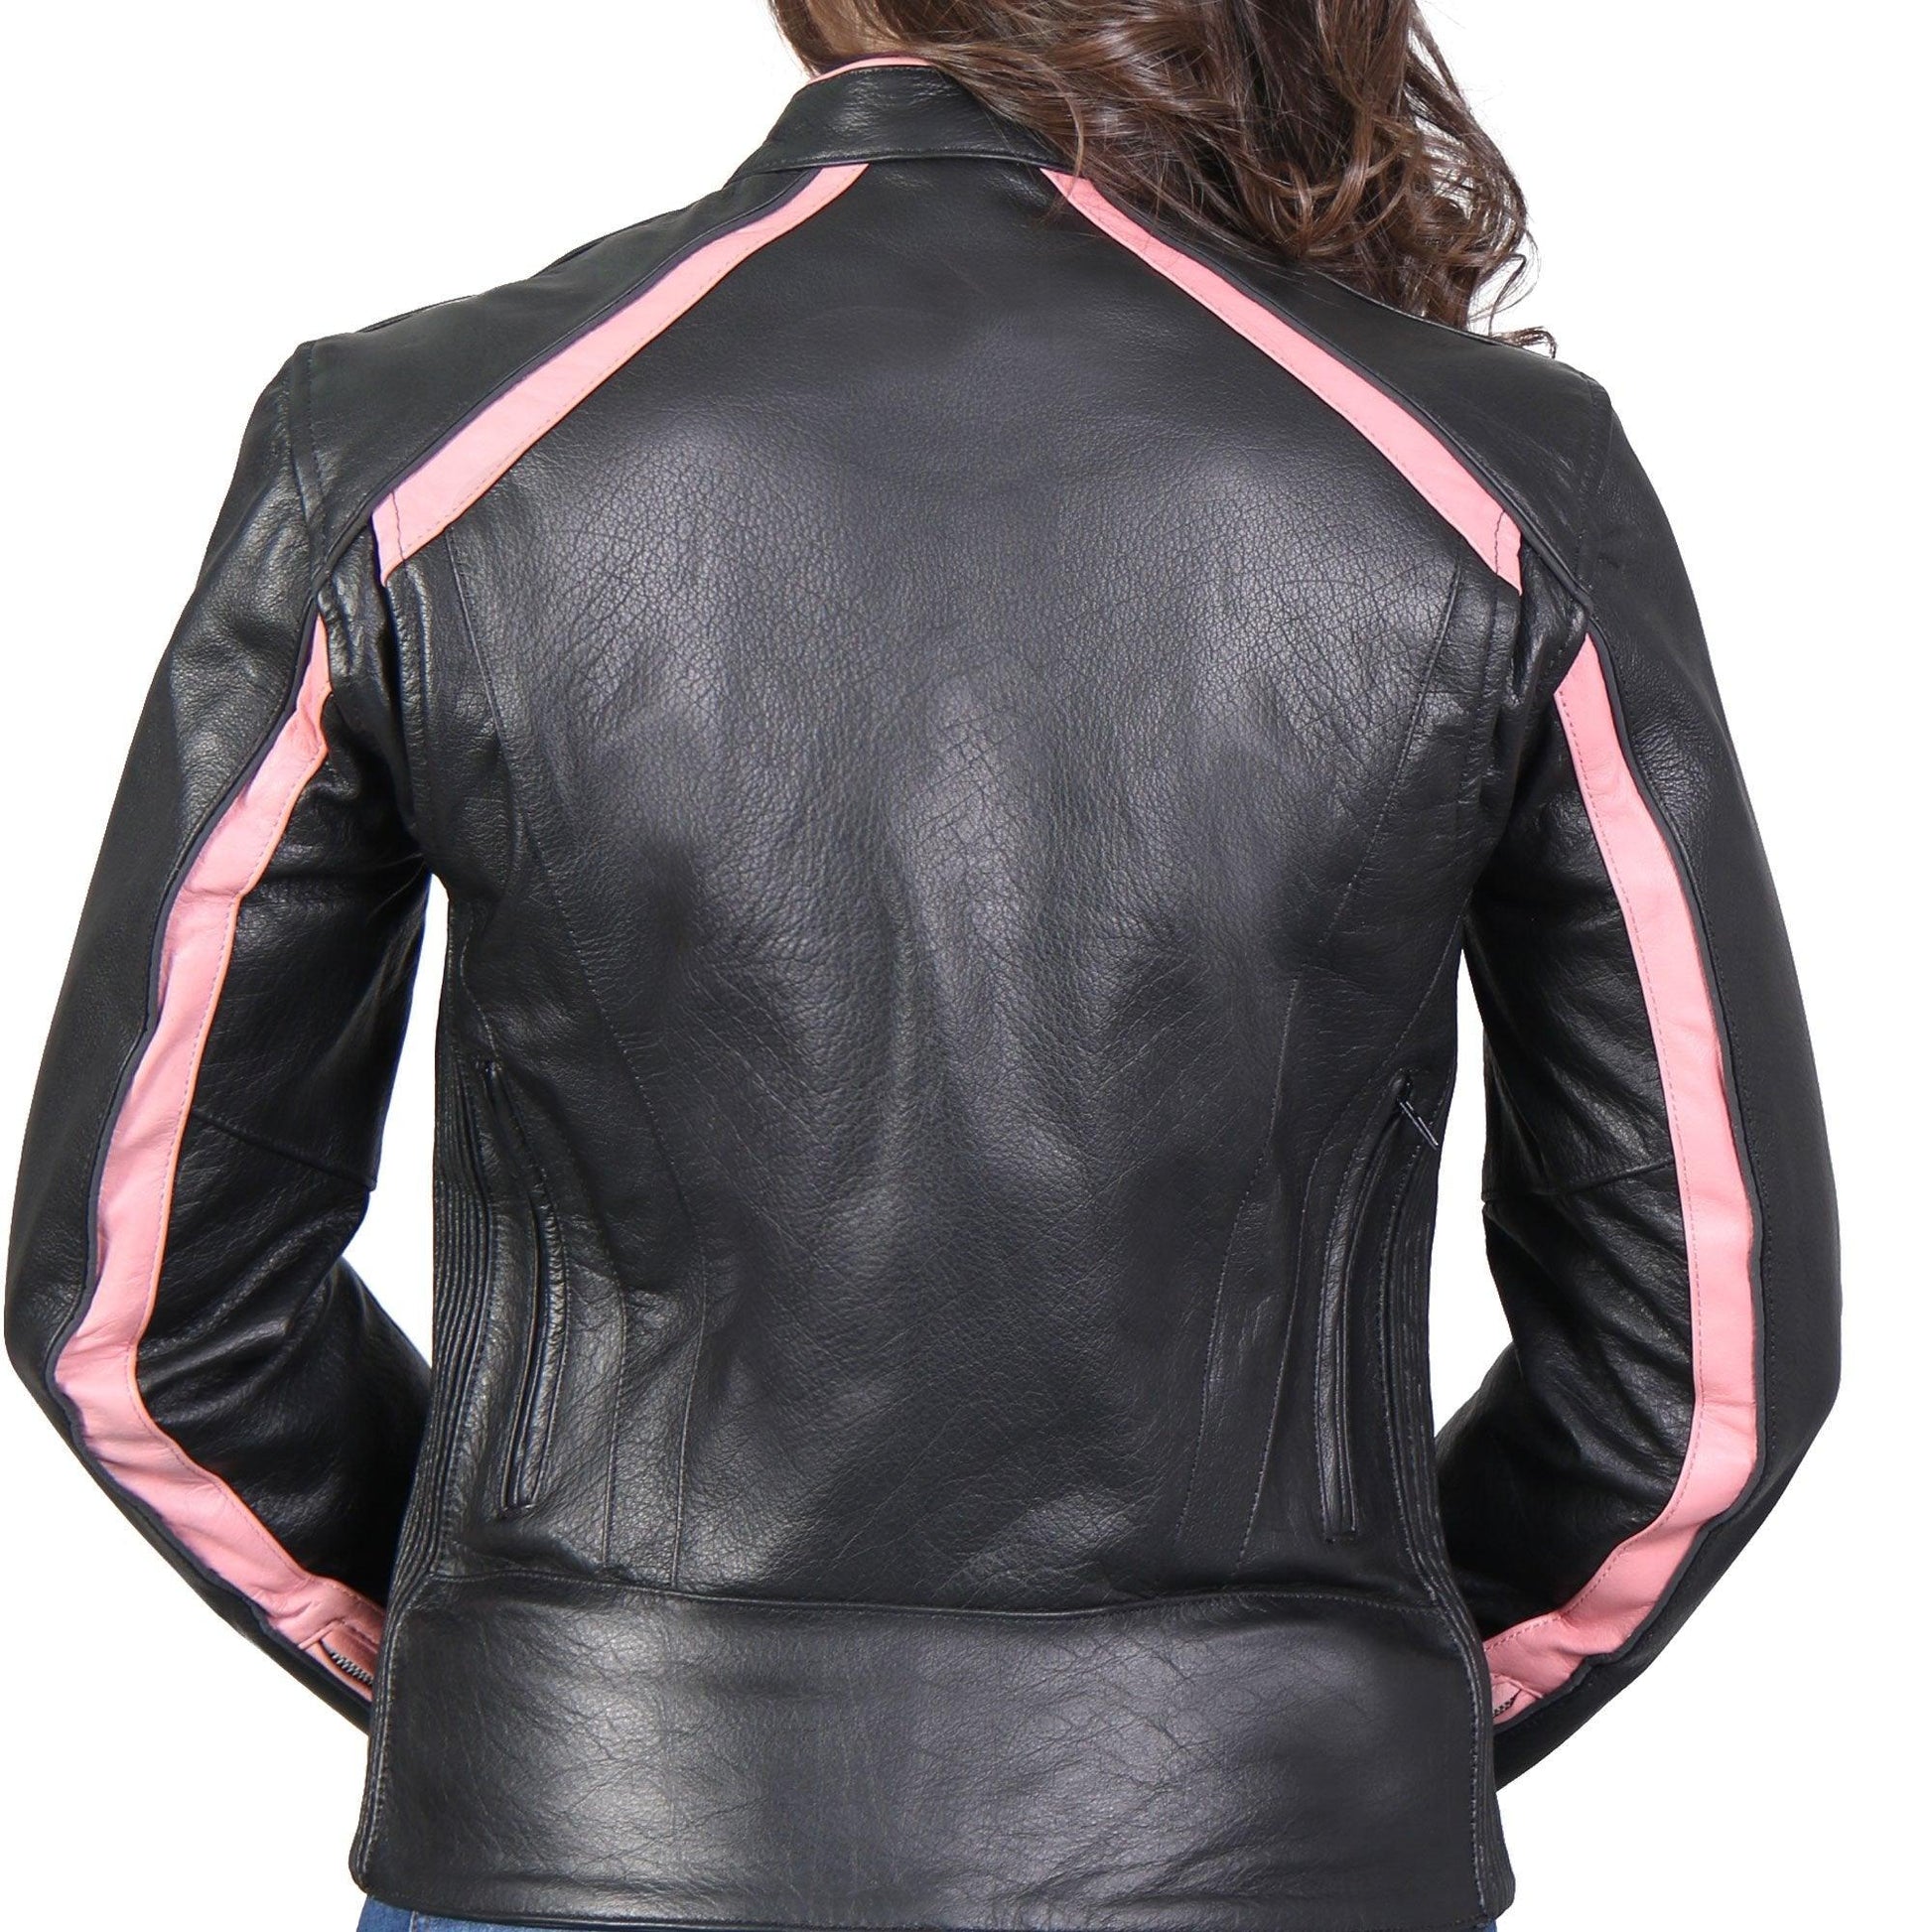 Ladies Pink Striped Leather Jacket With Reflective Piping - Military Republic